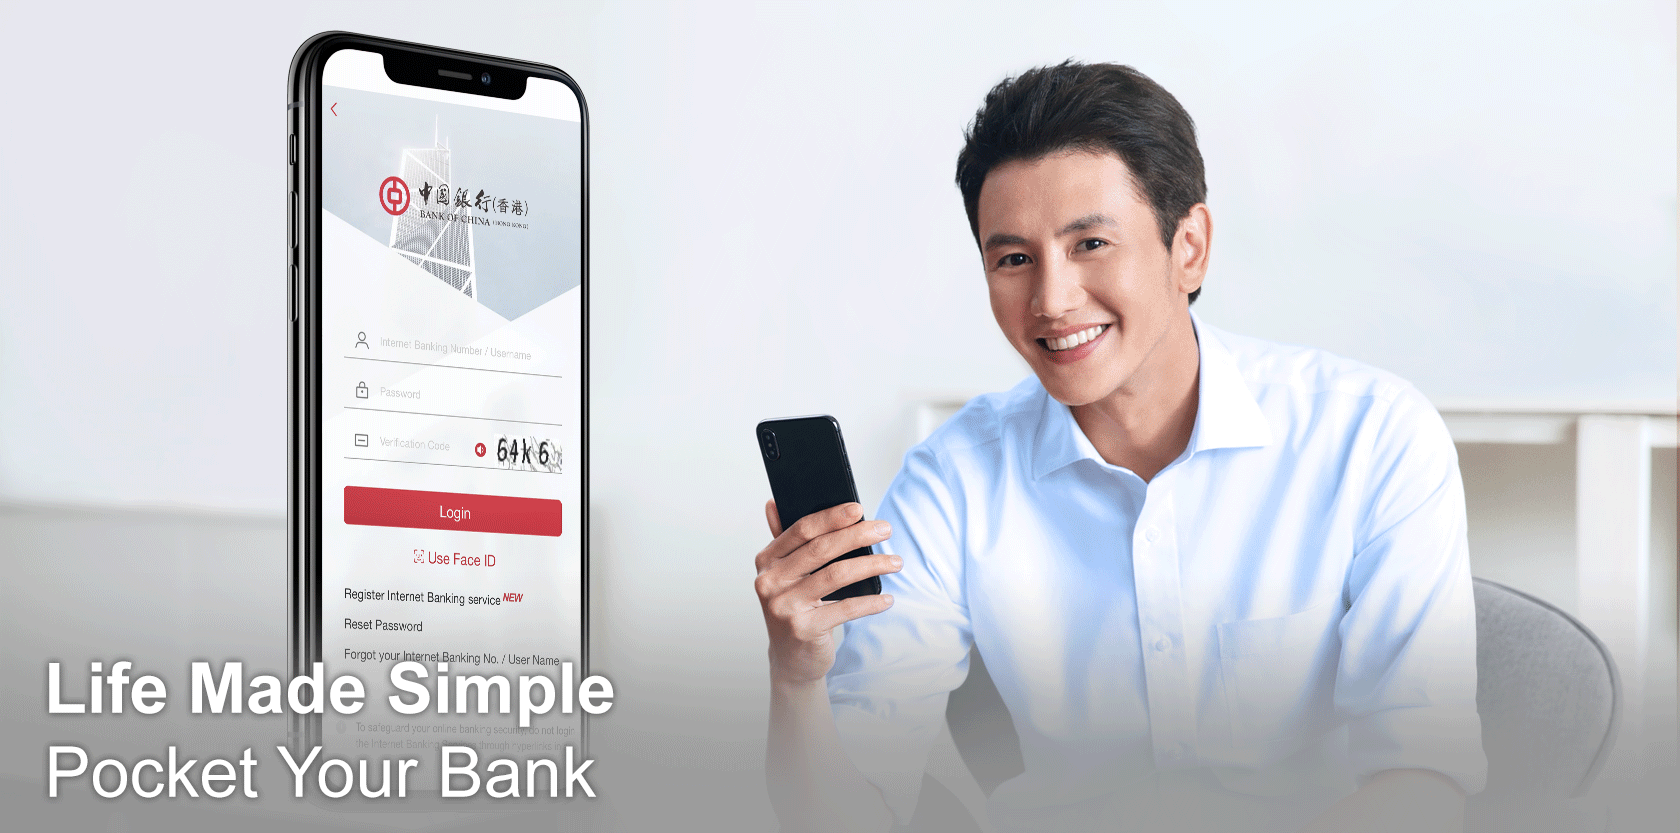 Life Made Simple Pocket Your Bank
Three simple steps take you into a new era of mobile banking